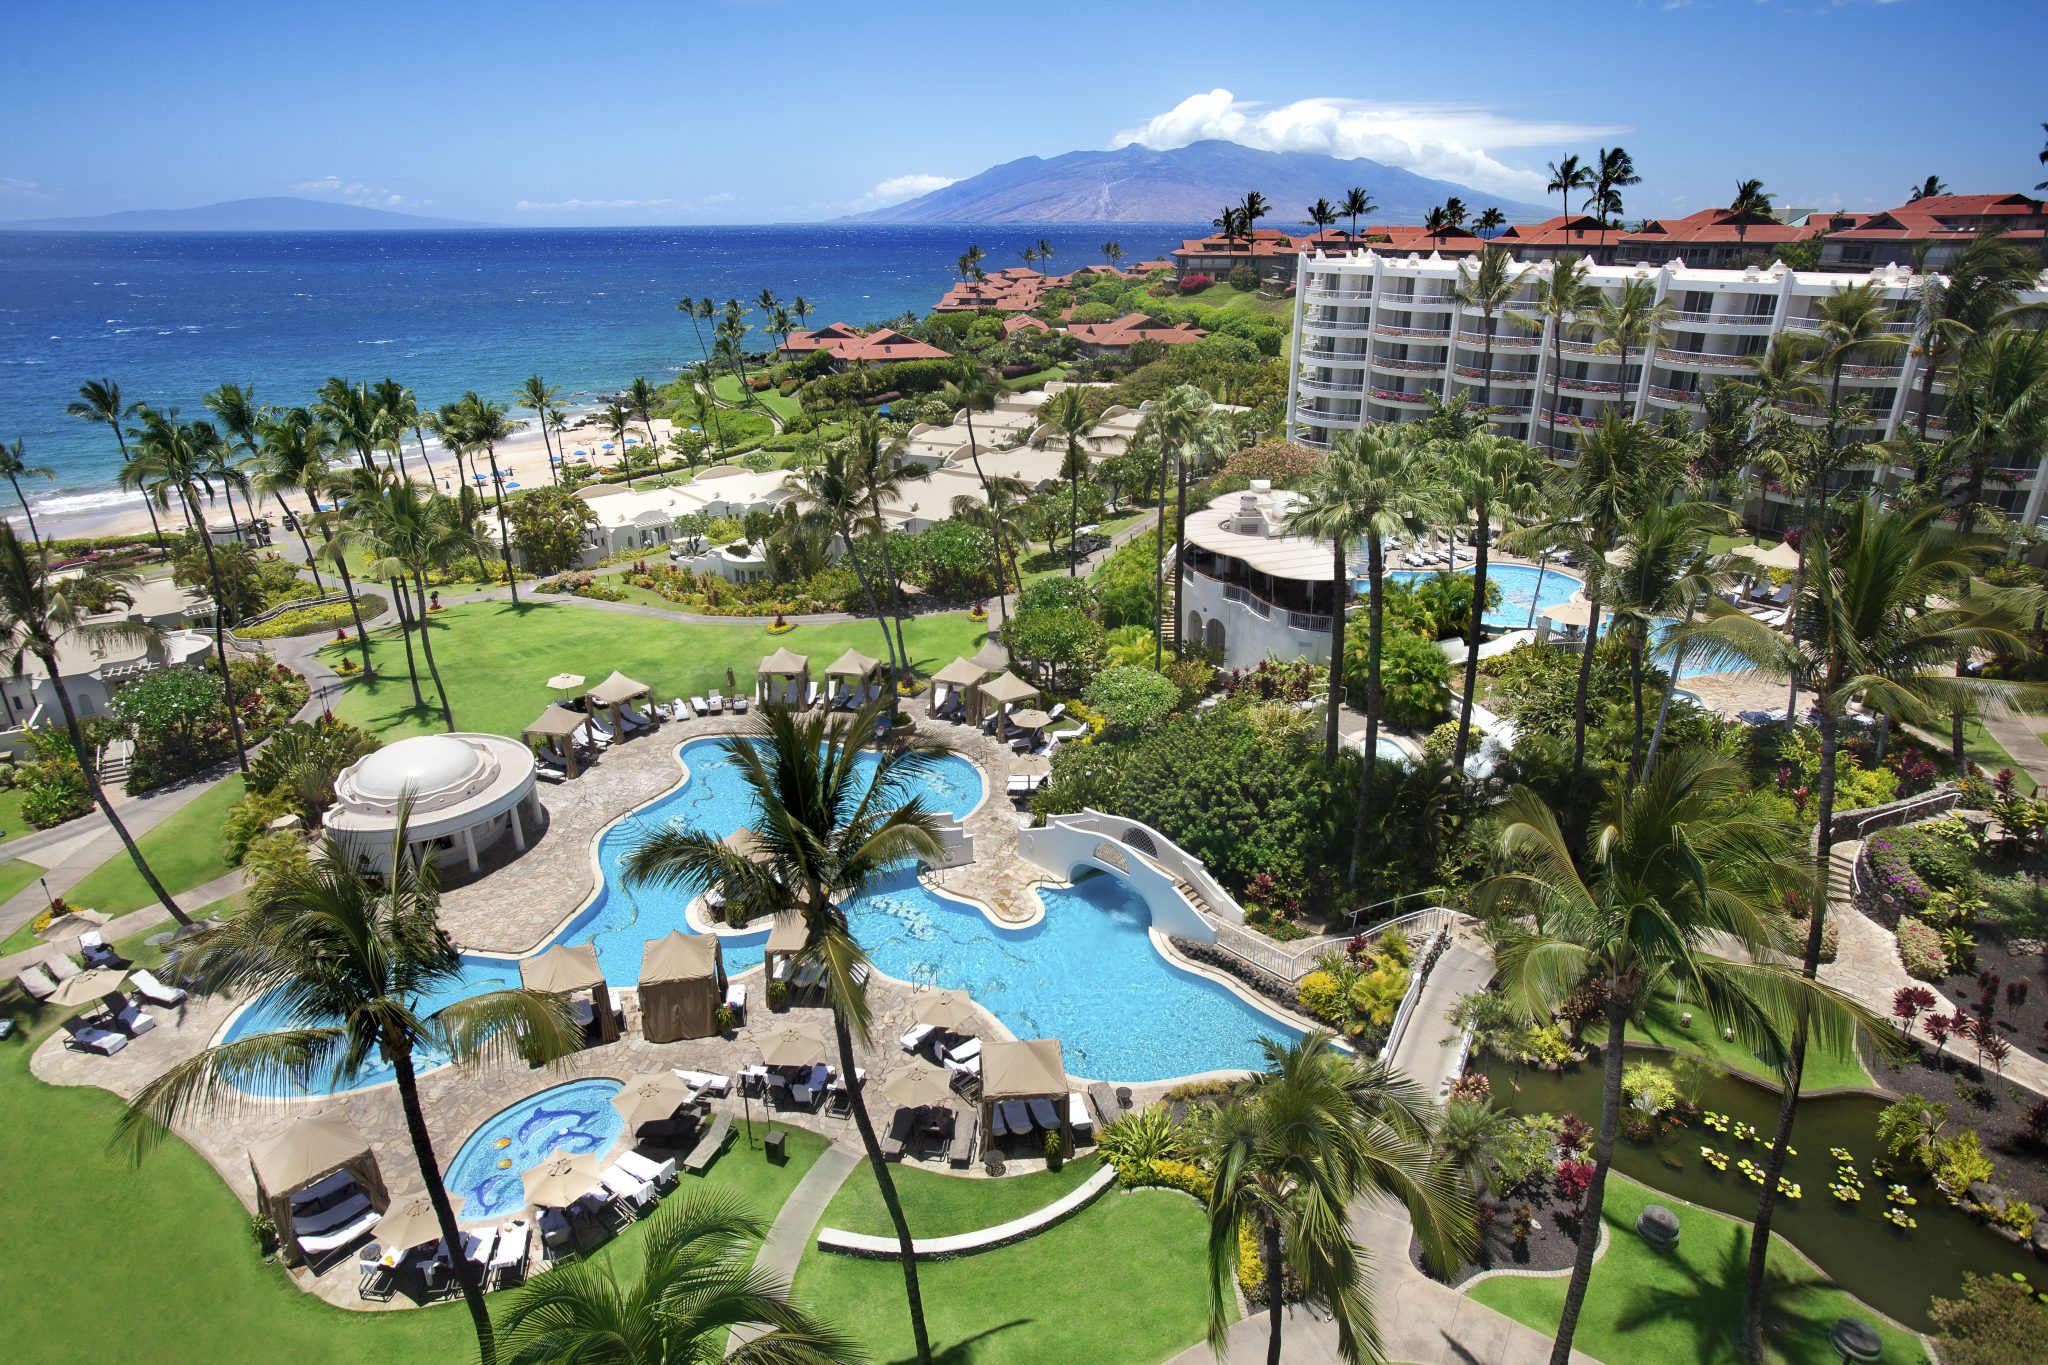 15 top resorts in Hawaii for couples